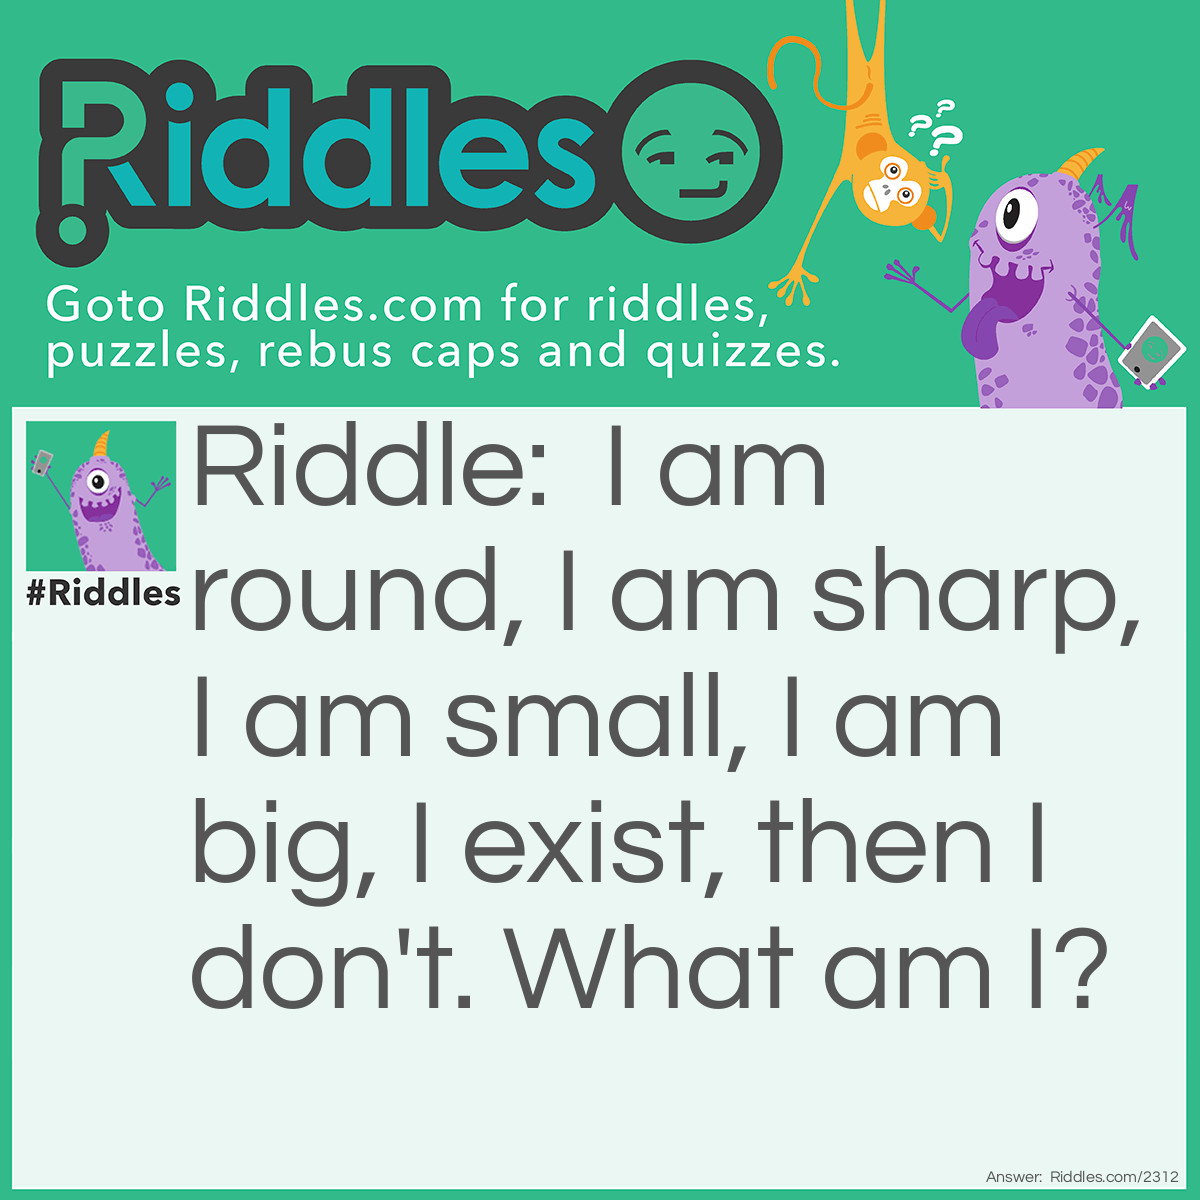 Riddle: I am round, I am sharp, I am small, I am big, I exist, then I don't. What am I? Answer: <span class="_2uma">The Moon. It's round when it's full, it's sharp when it's a crescent, its size can vary depending upon its phase, and it's gone when it's a new moon.</span>